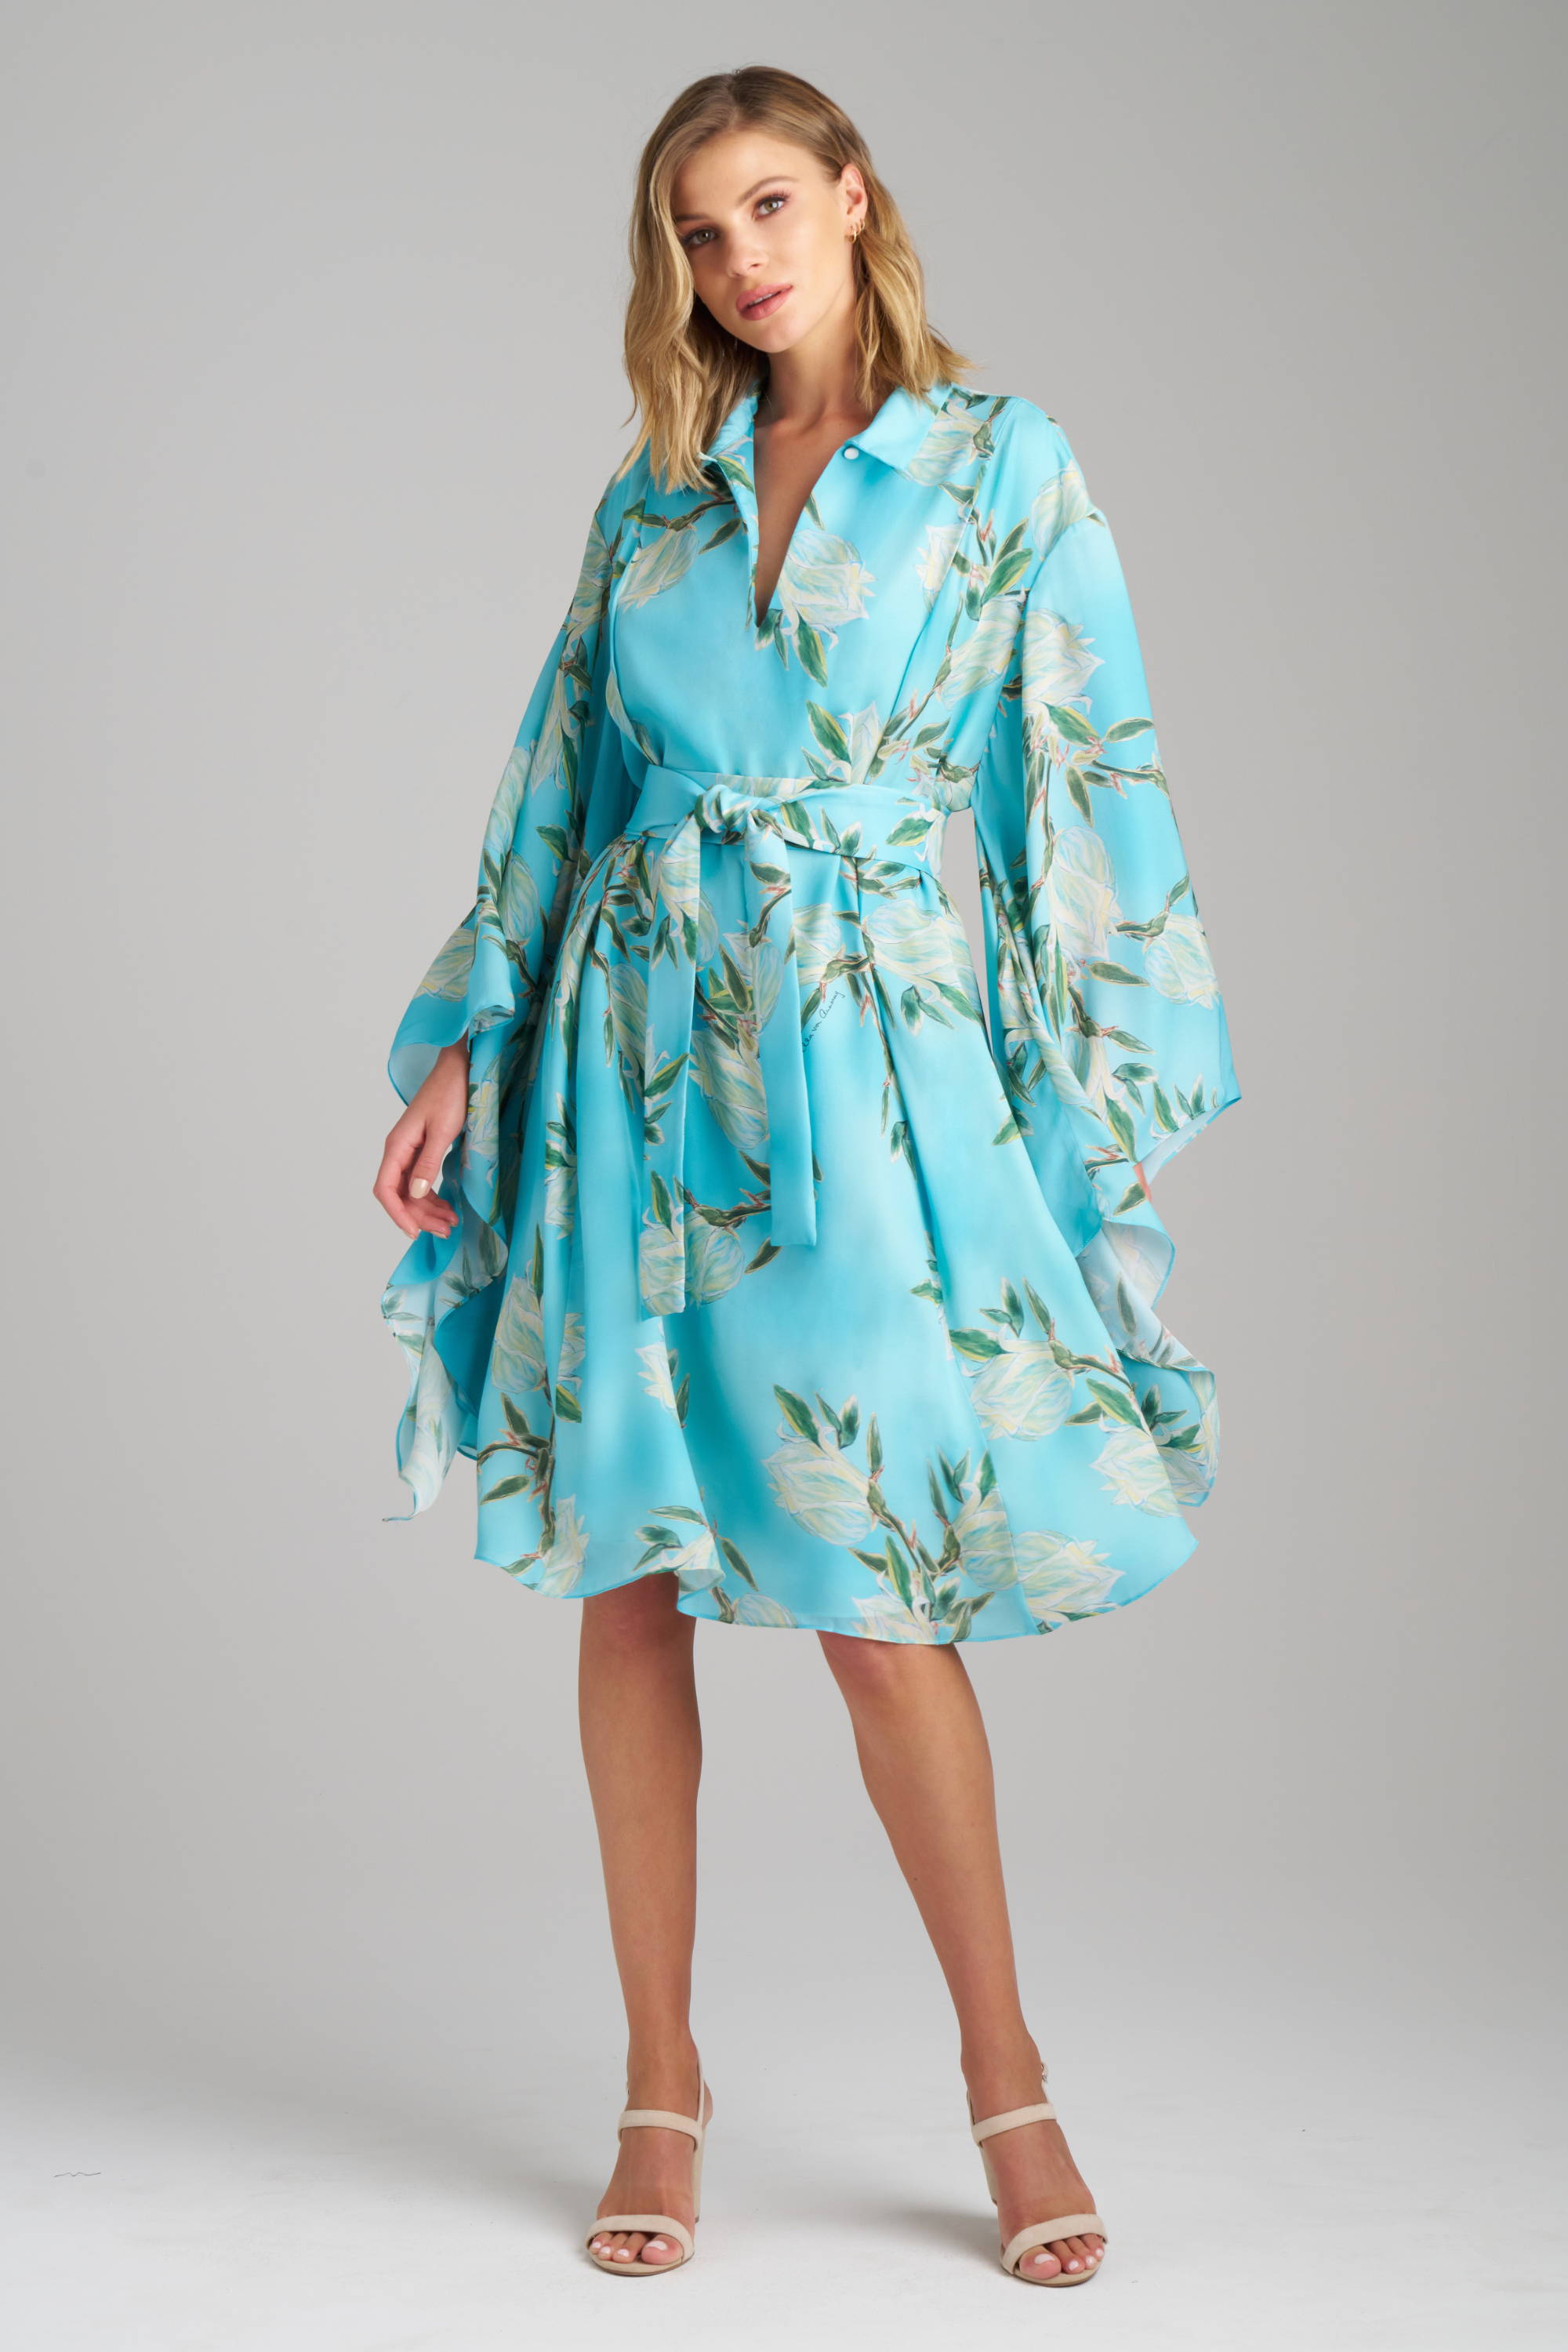 Woman wearing blue floral printed silk short dress with self tie belt and kimono sleeves for women's black tie clothing for destination weddings by Ala von Auersperg